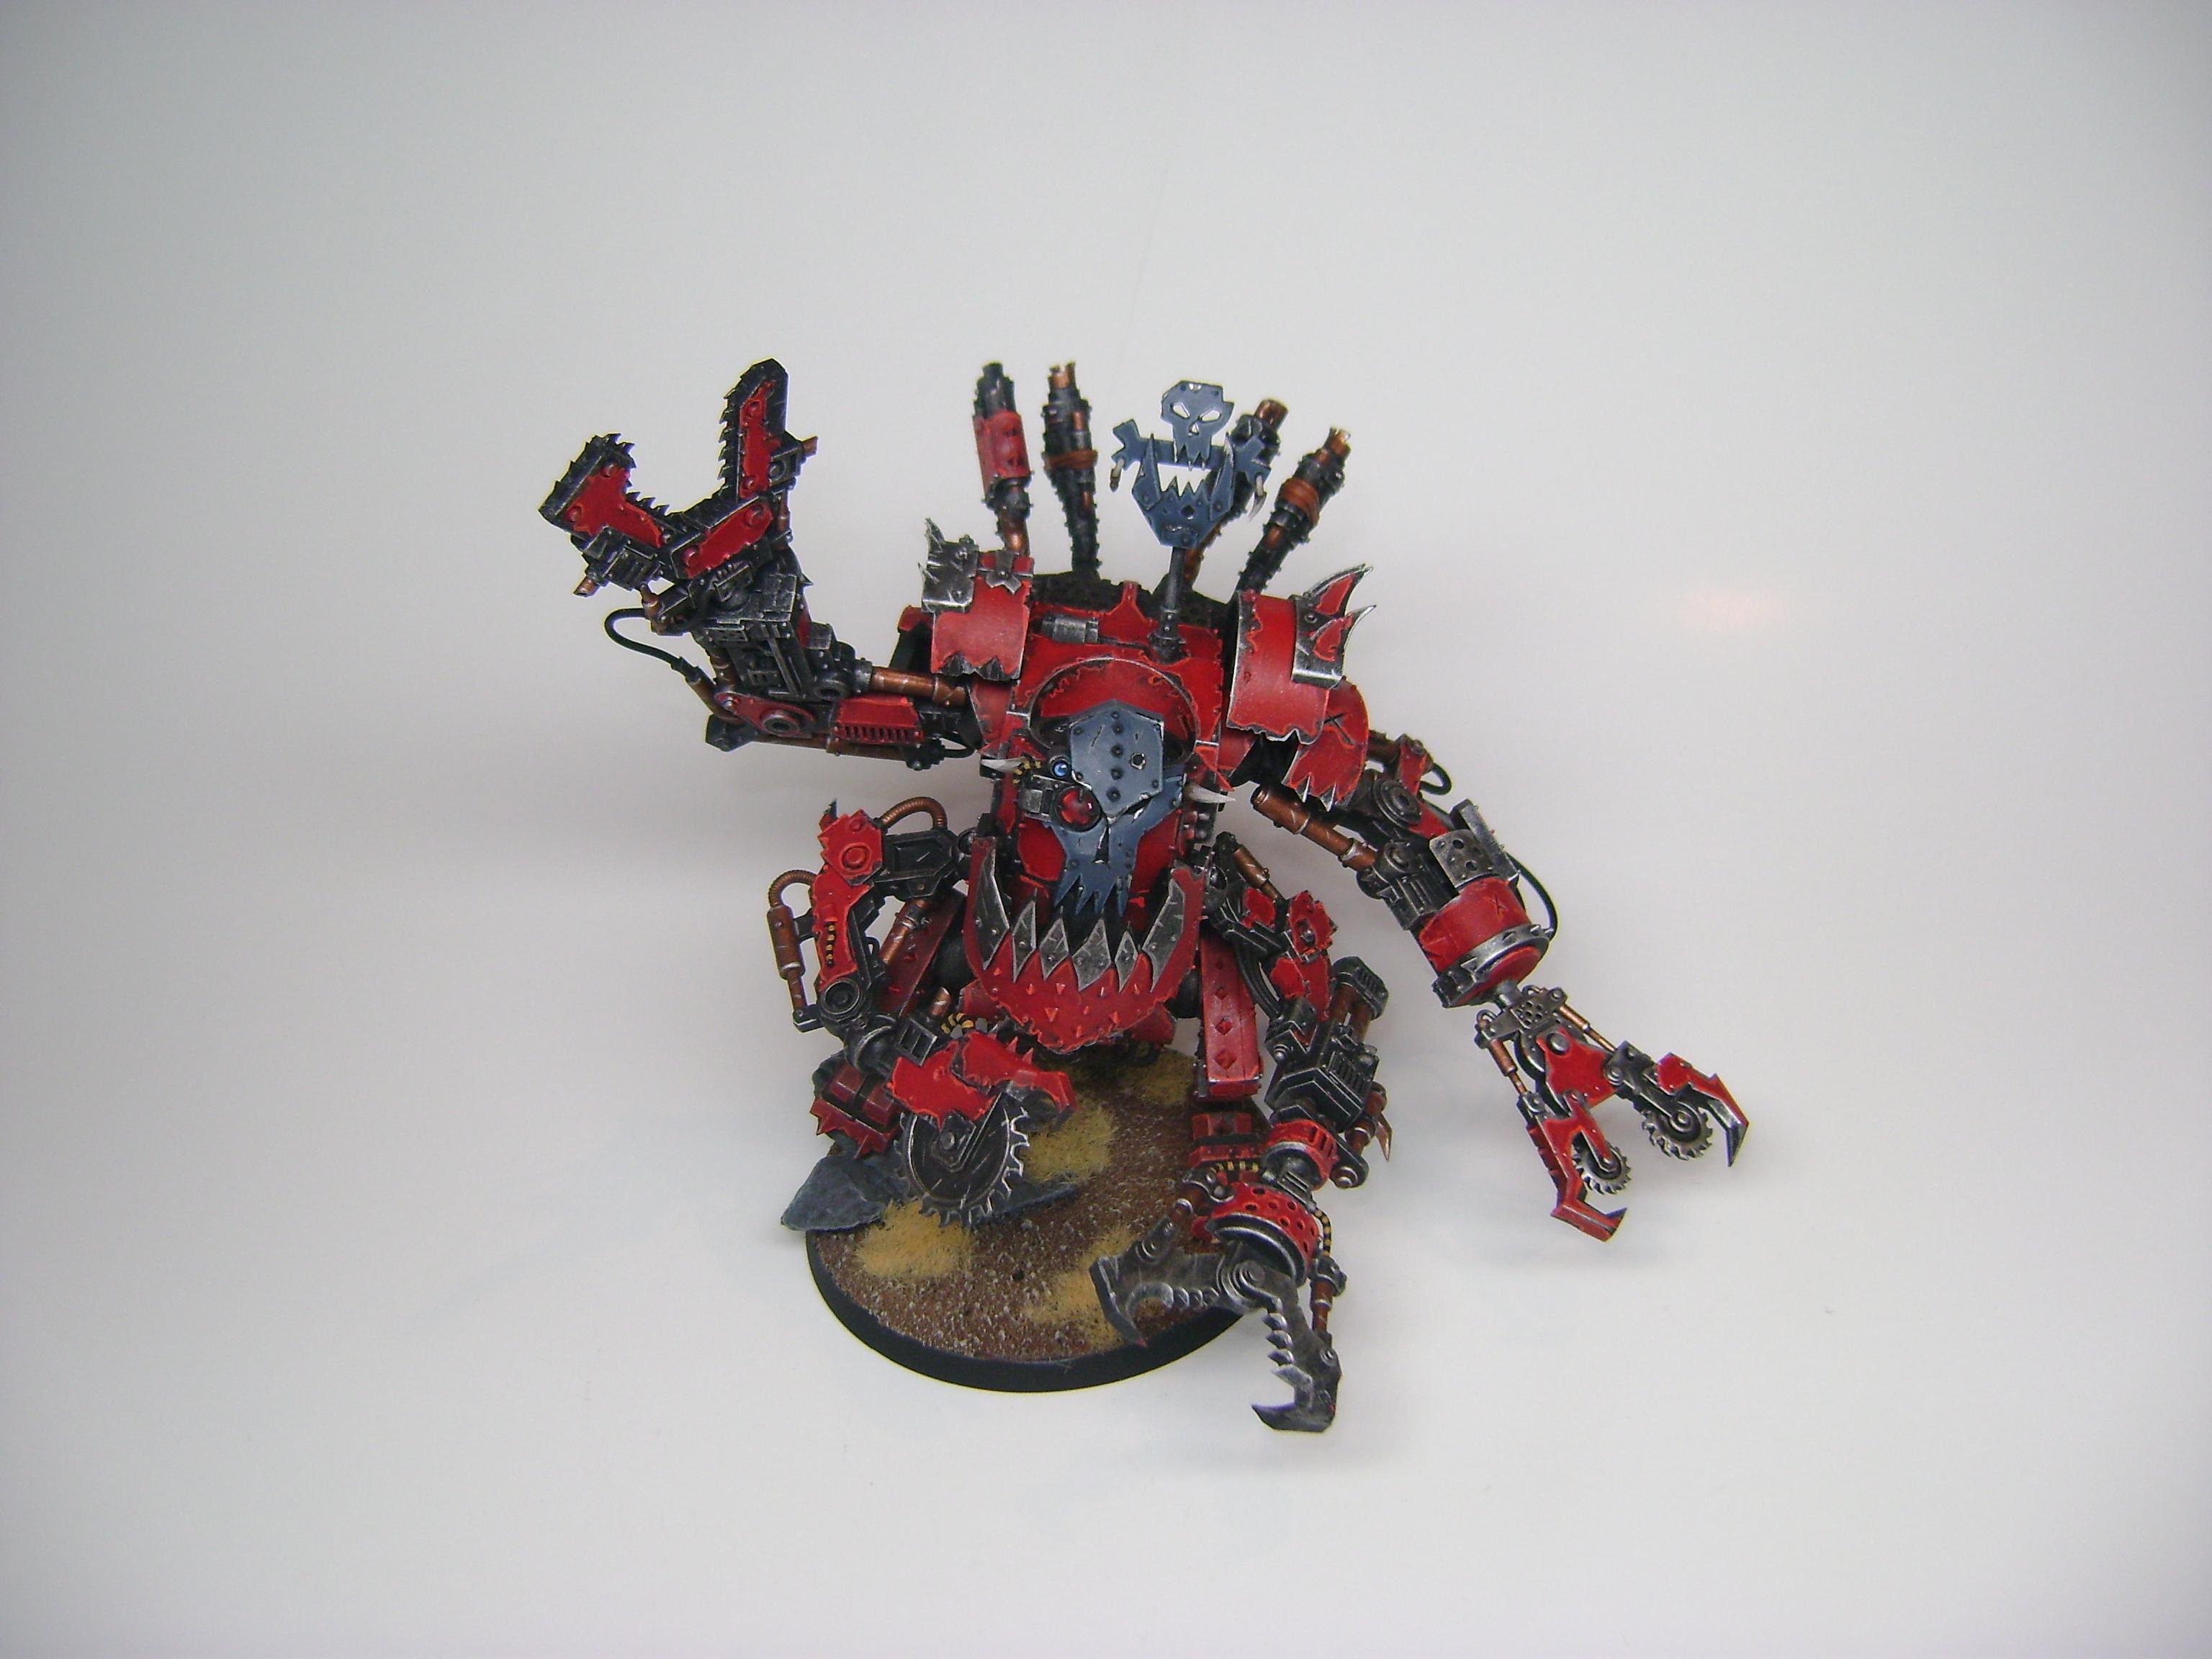 Deff Dread, Orks, Deff Dread above